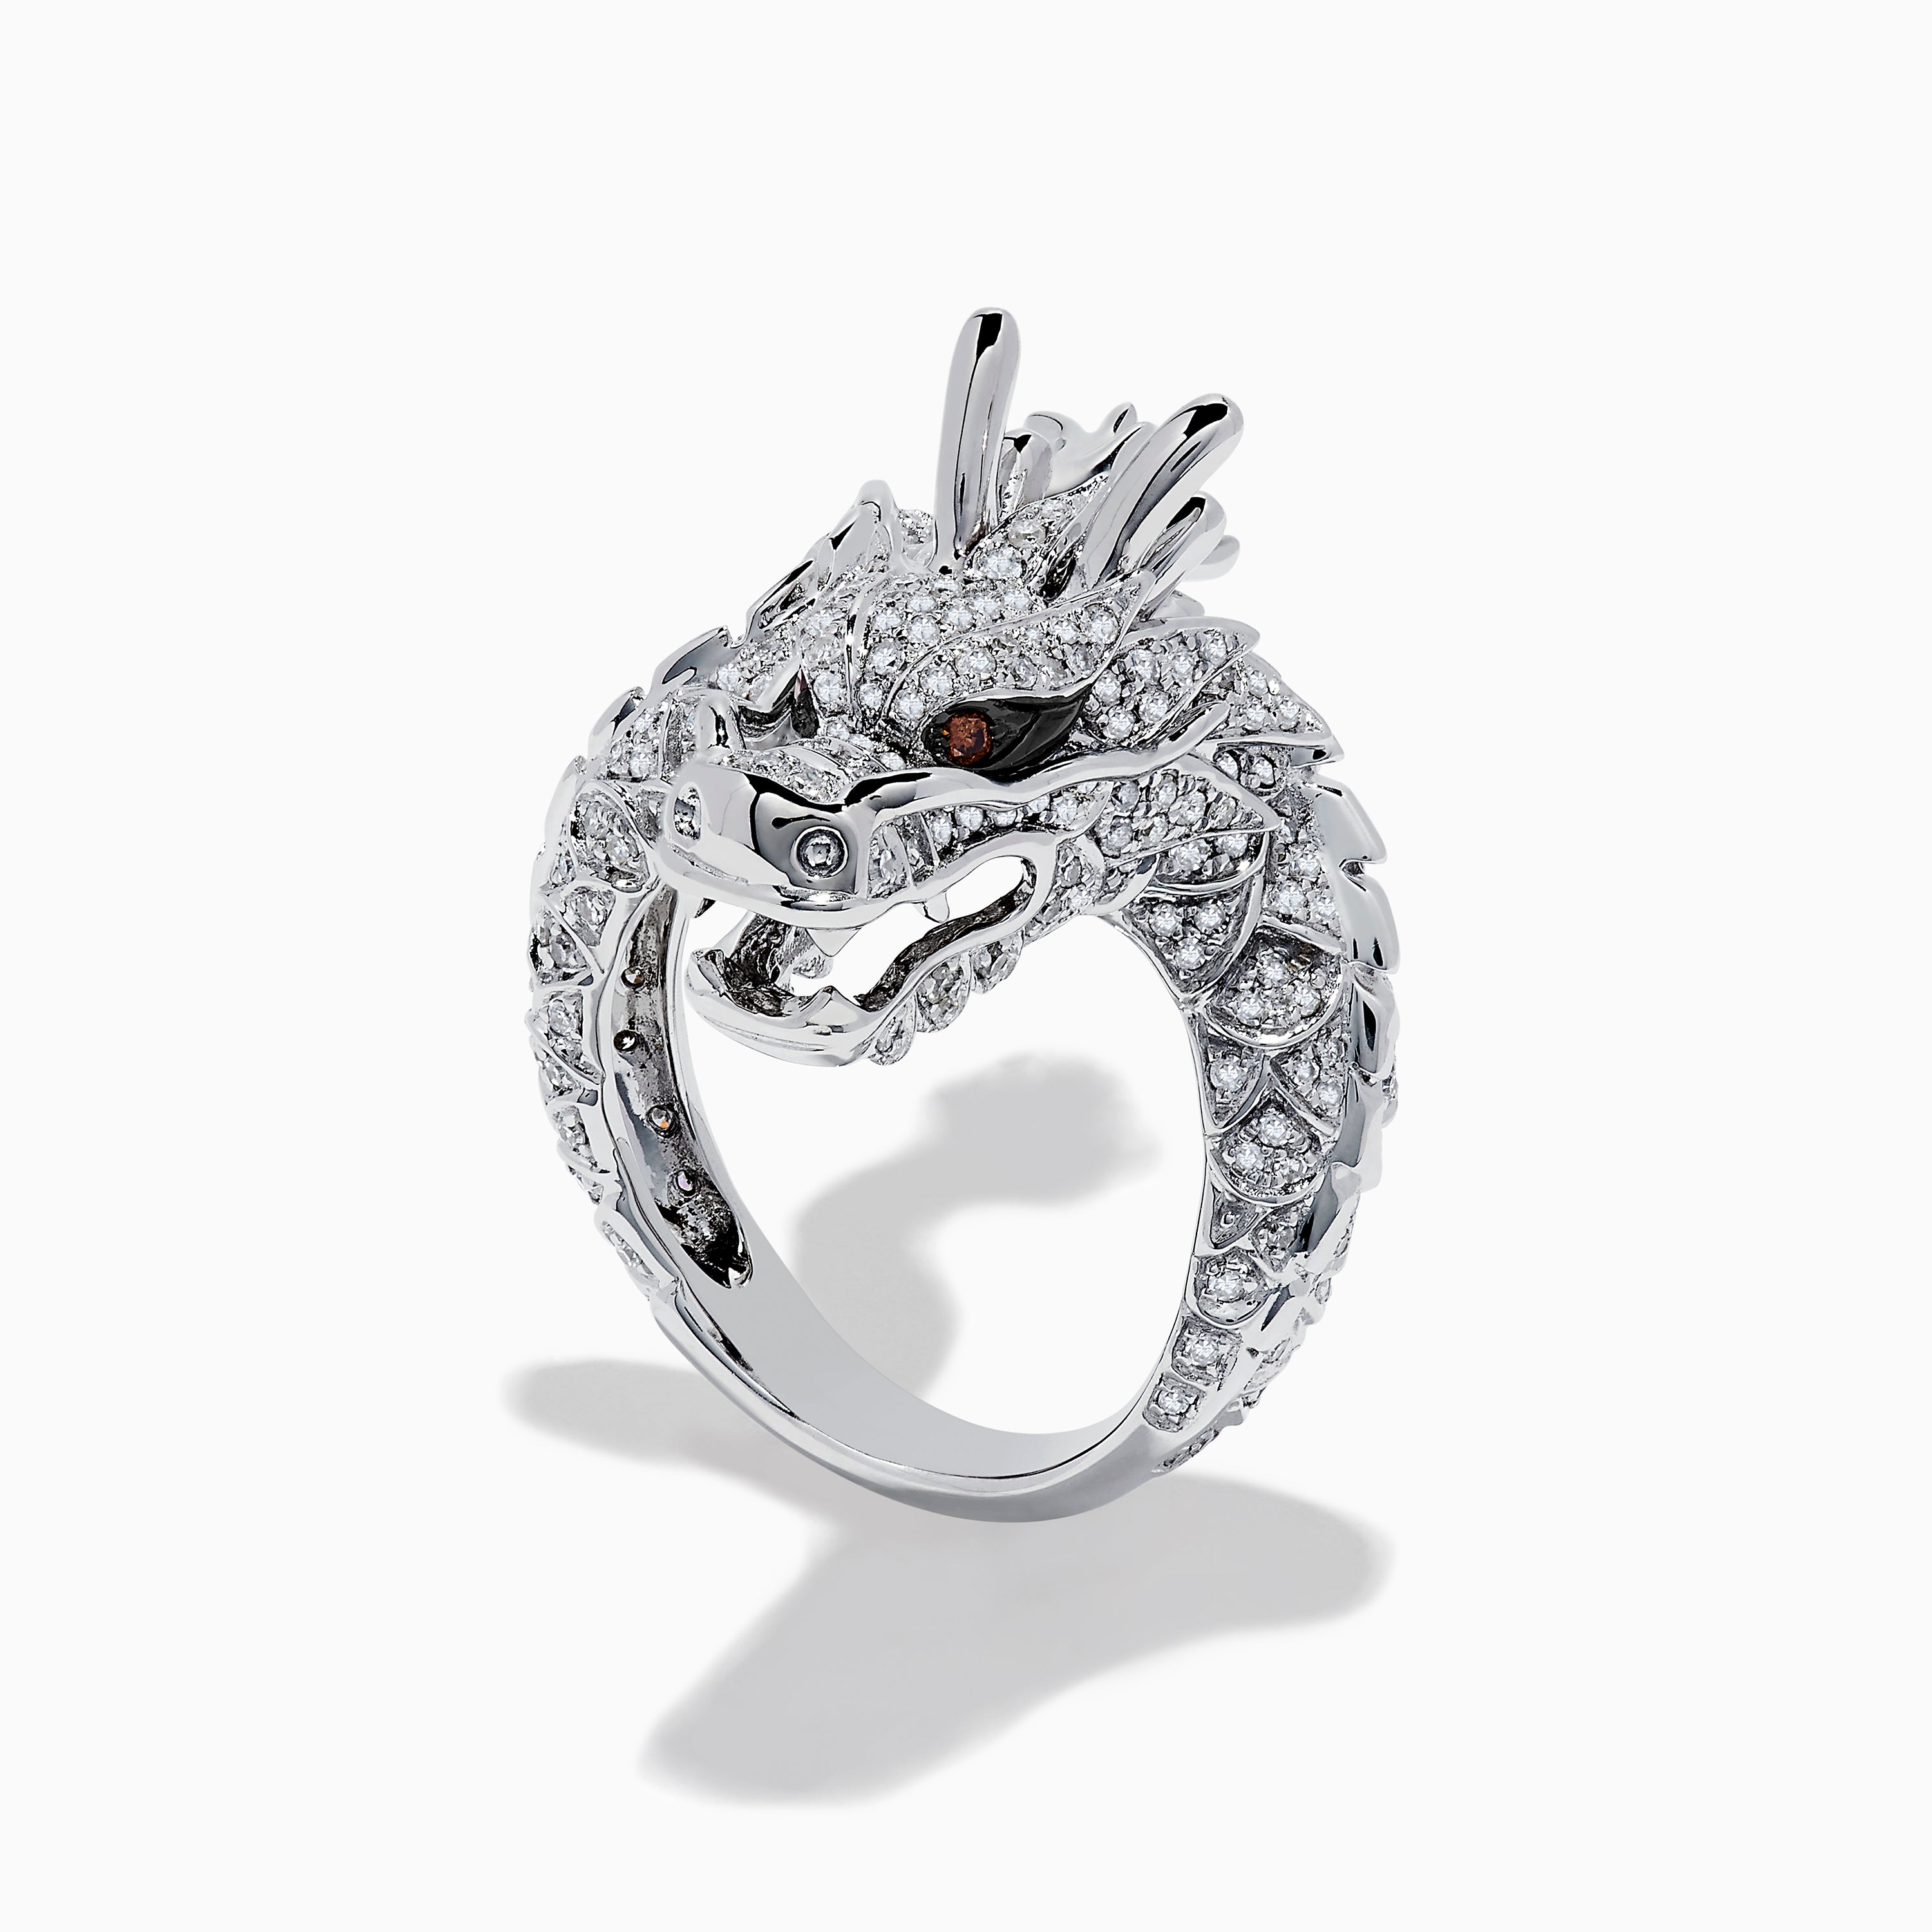 Silver Dragon Ring | besttohave.com